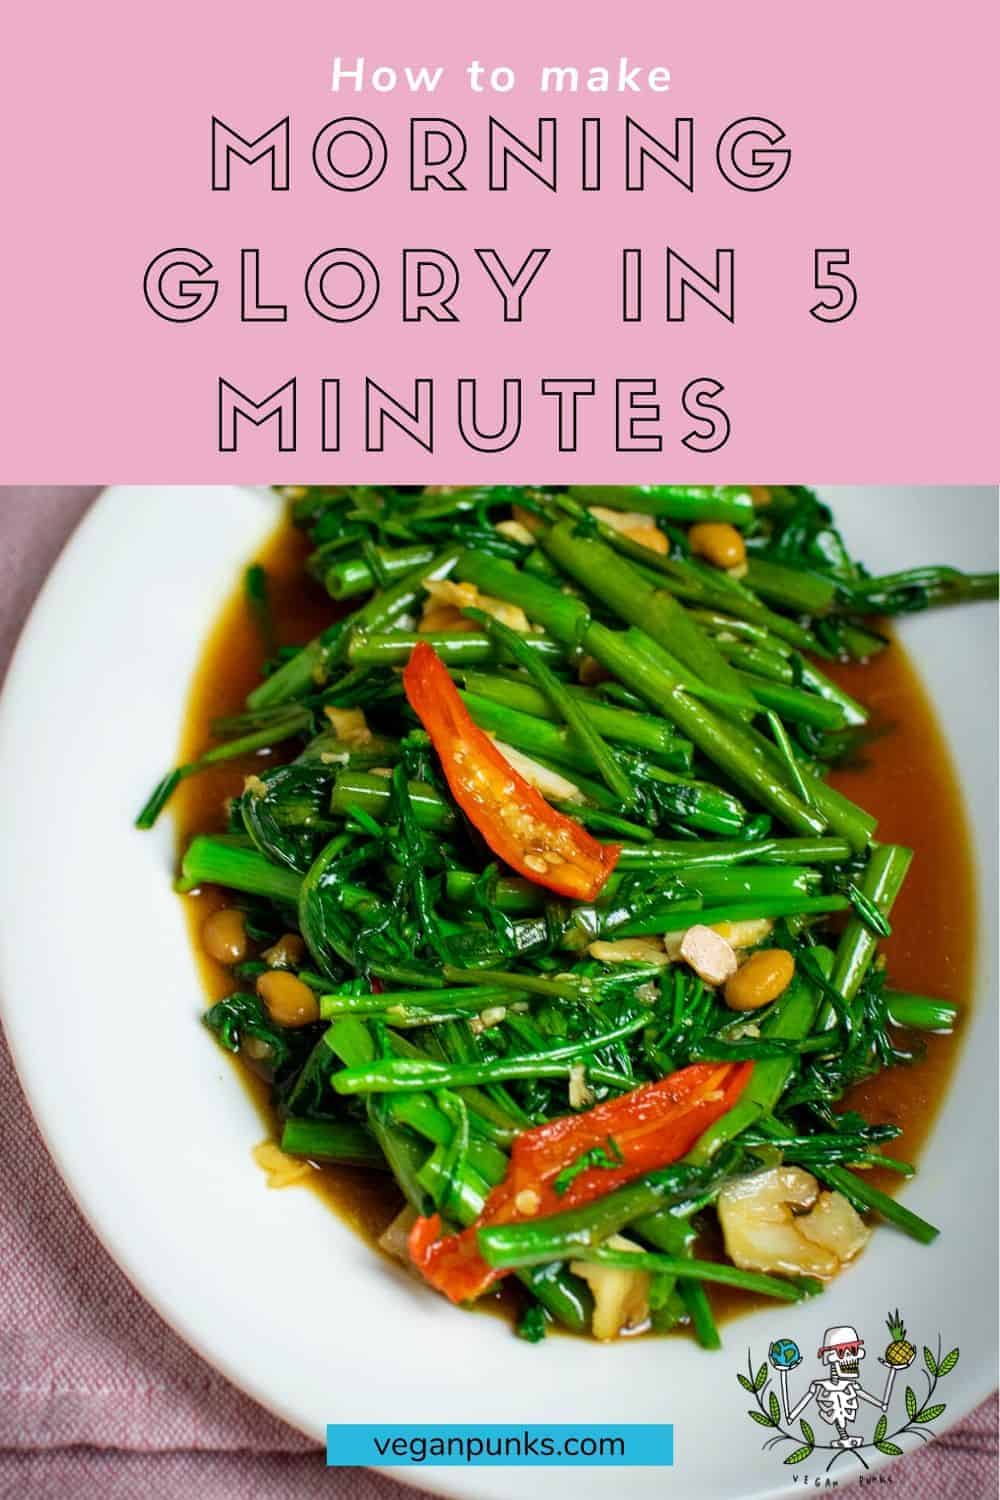 Pin image of Thai Morning Glory, on a white plate with red chilli on top, and a pink title at the top,